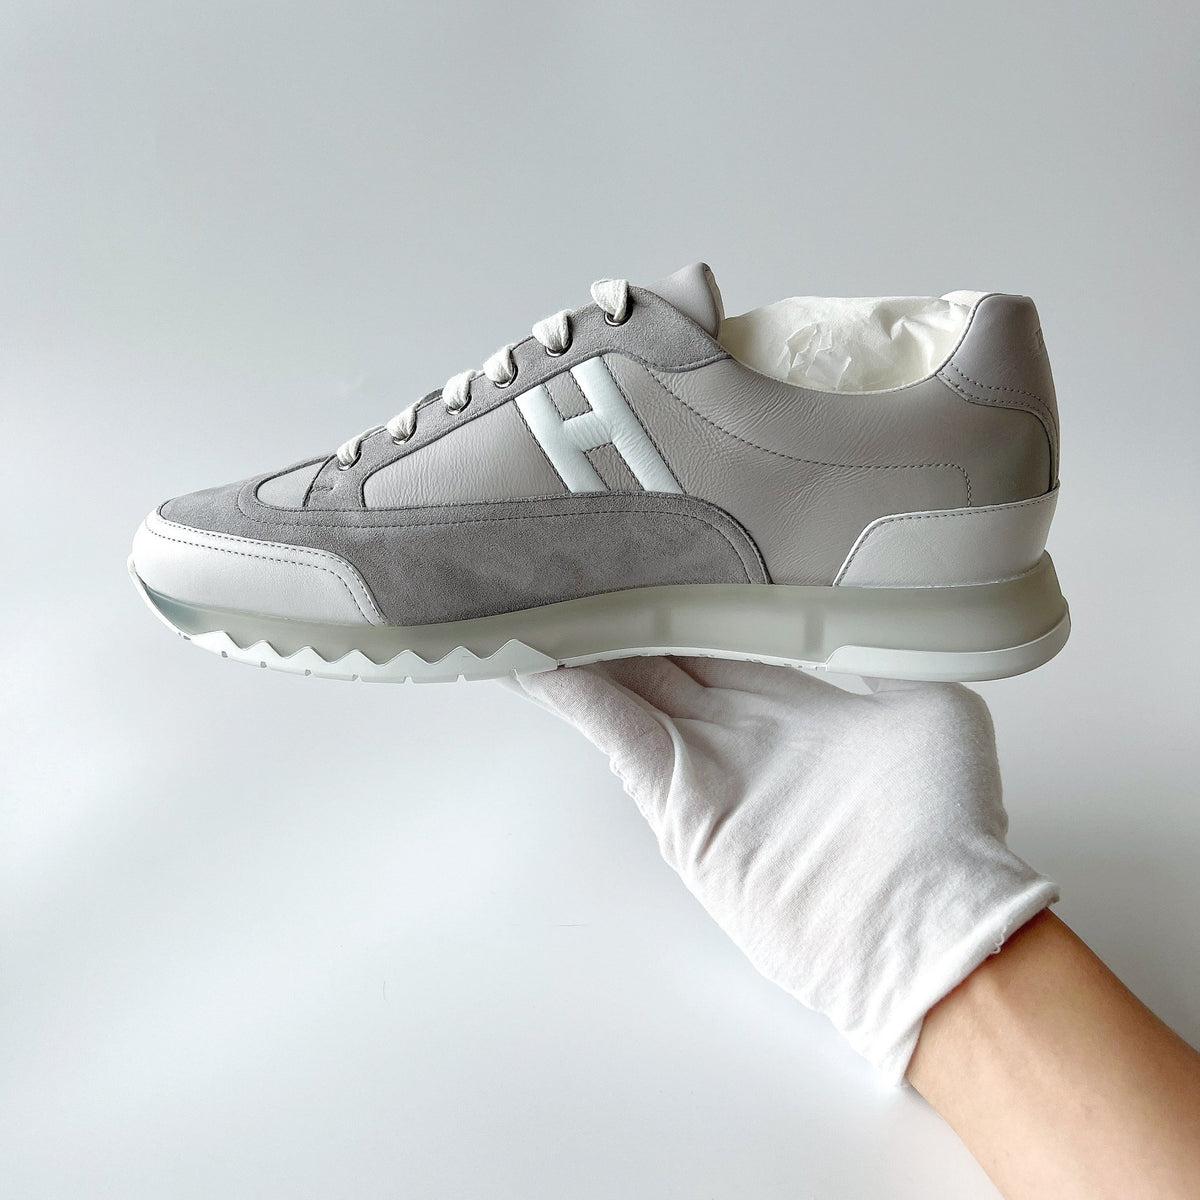 Shop this comfy pair of Hermes Mens Trail Sneakers In Grey And White. They are made from a mix of calfskin and suede goatskin. They are true to size and have a super comfortable fit for everyday outings. This pair of trail sneakers comes in EU size